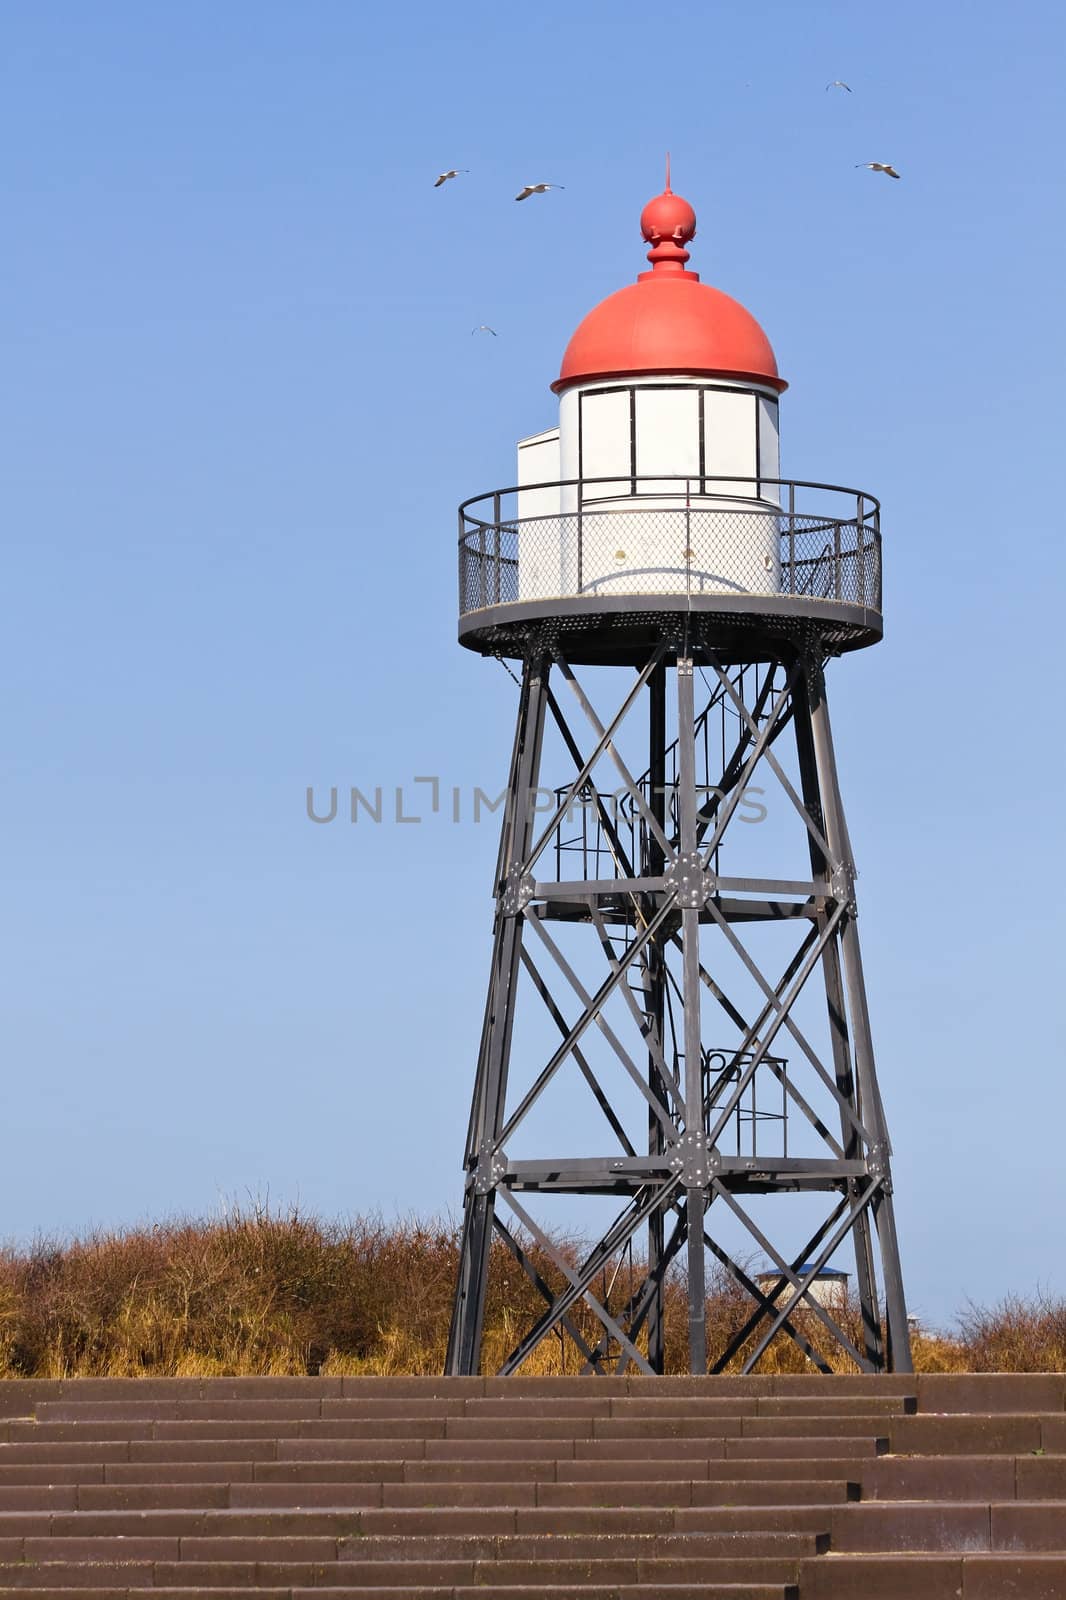 Lookout tower at the coast with blue sky background and seagulls